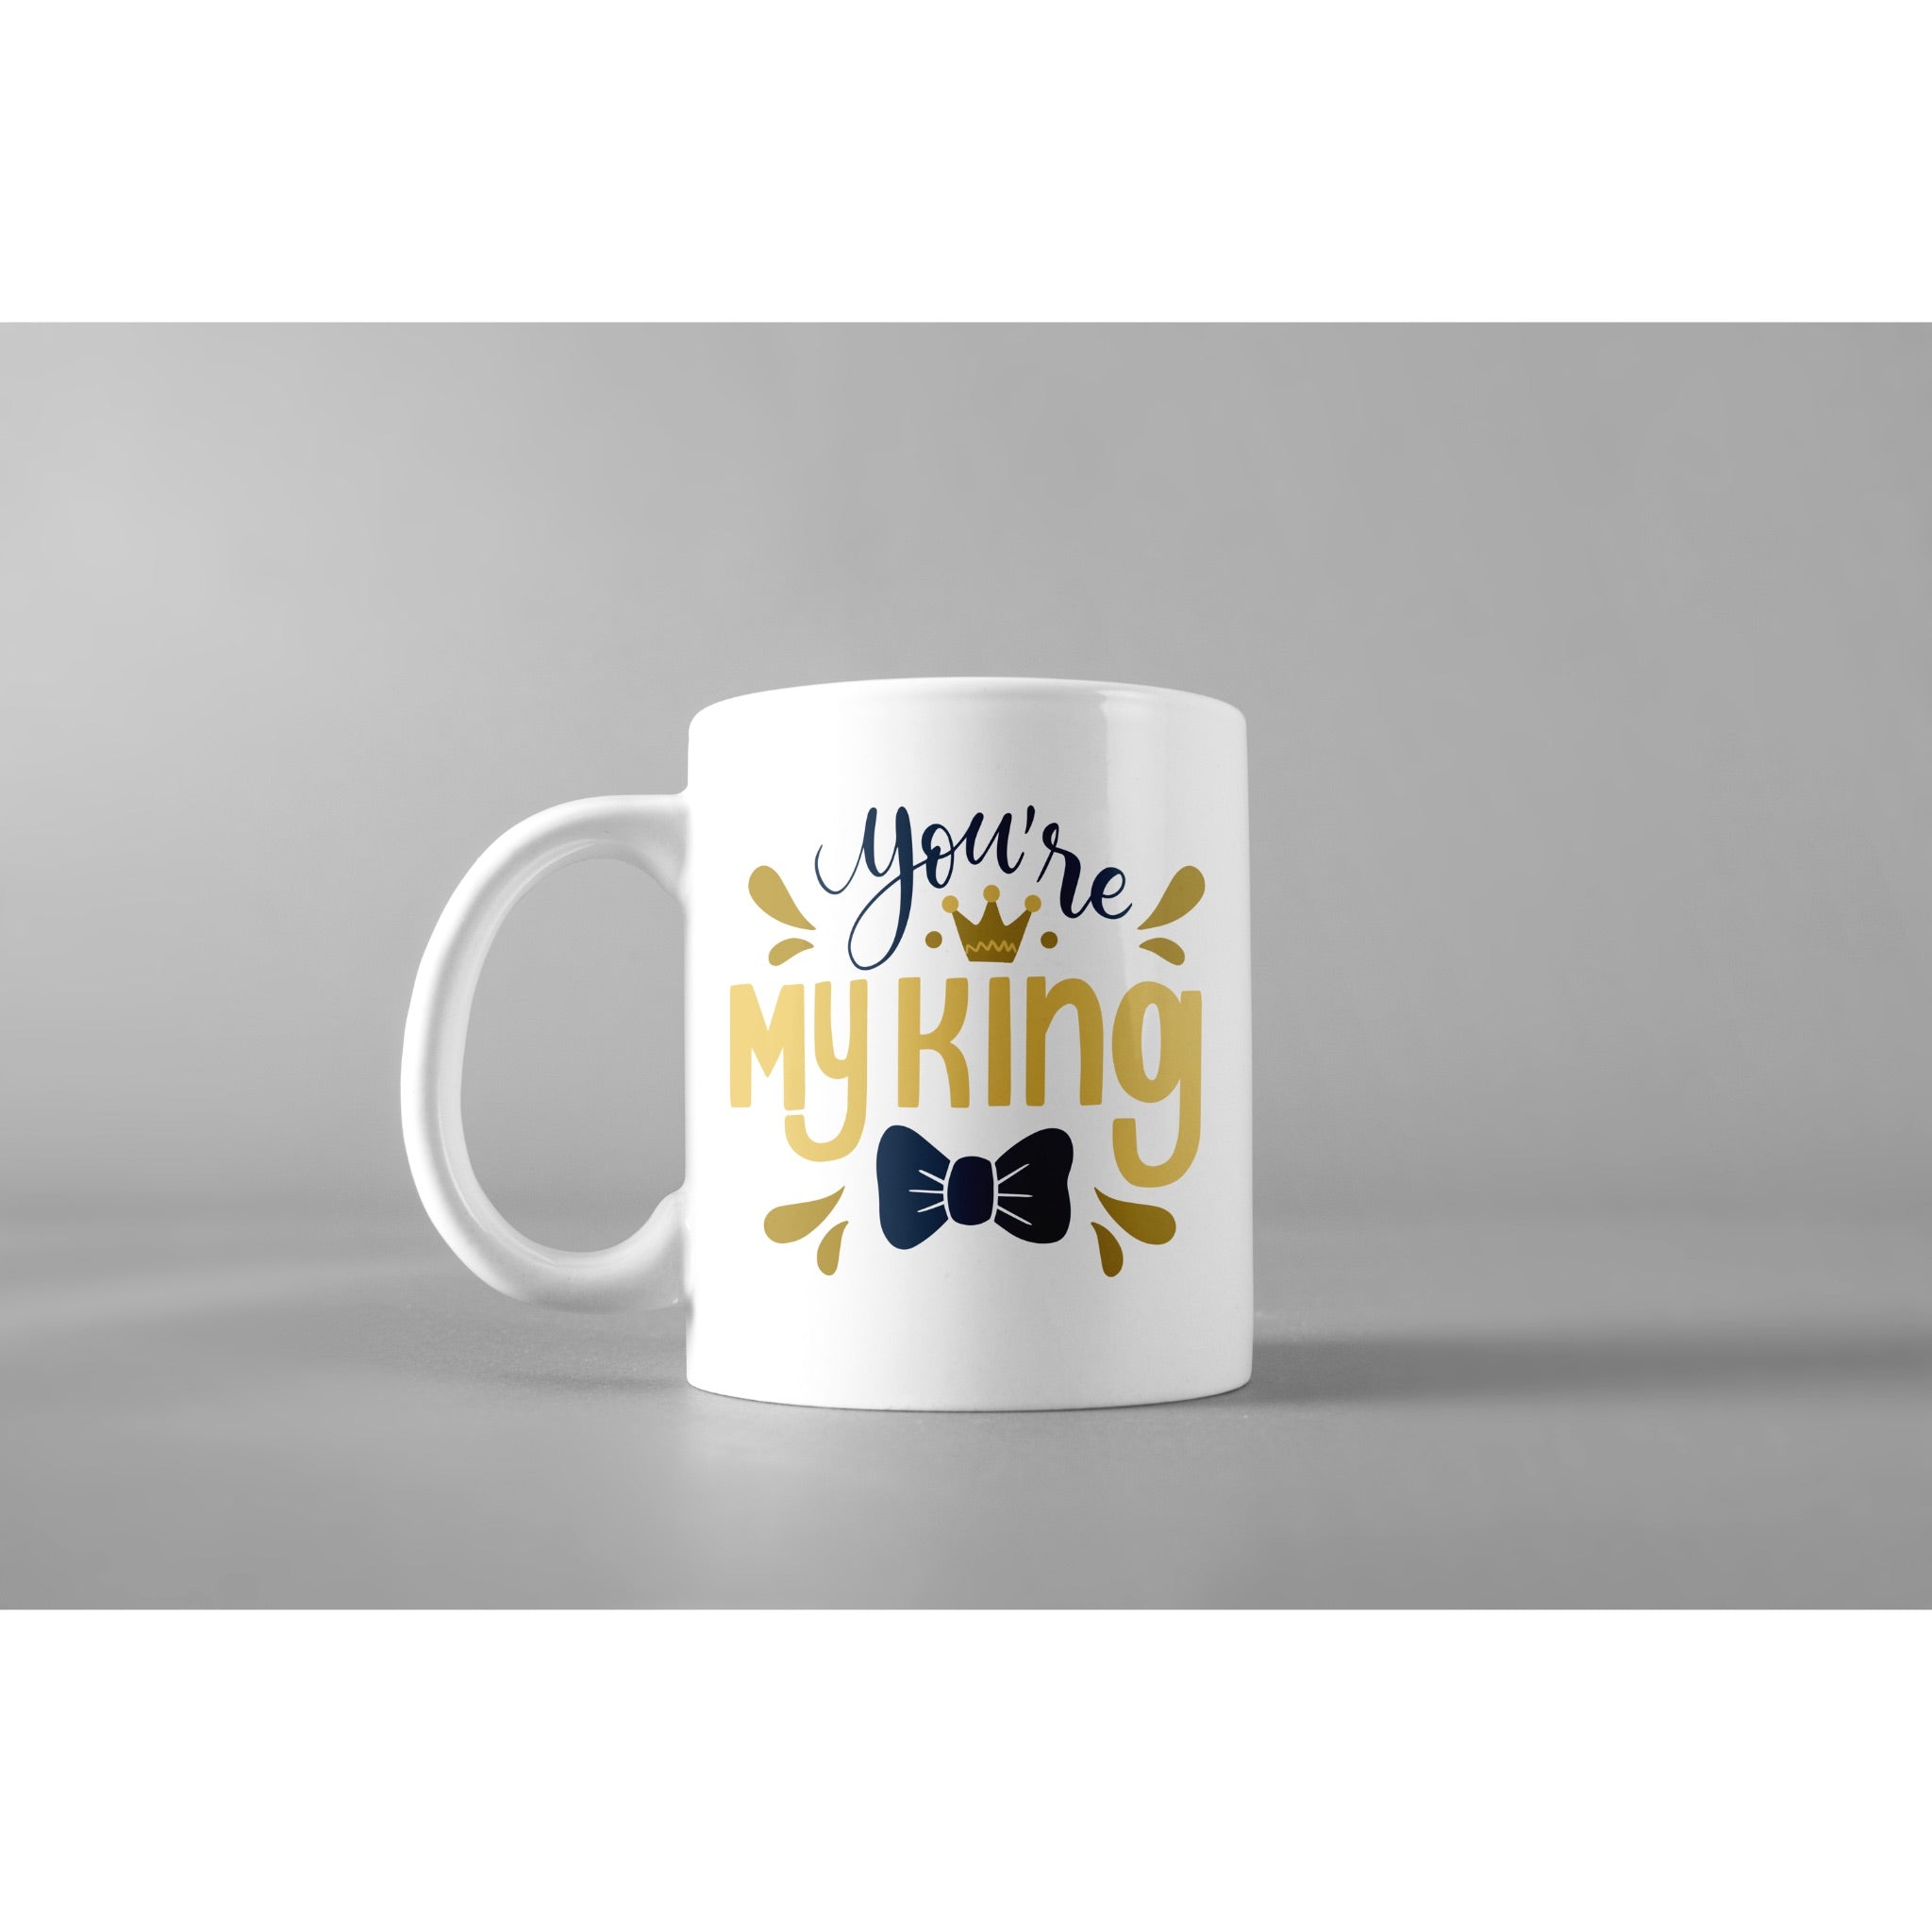 You're my King-- Mugs for Father